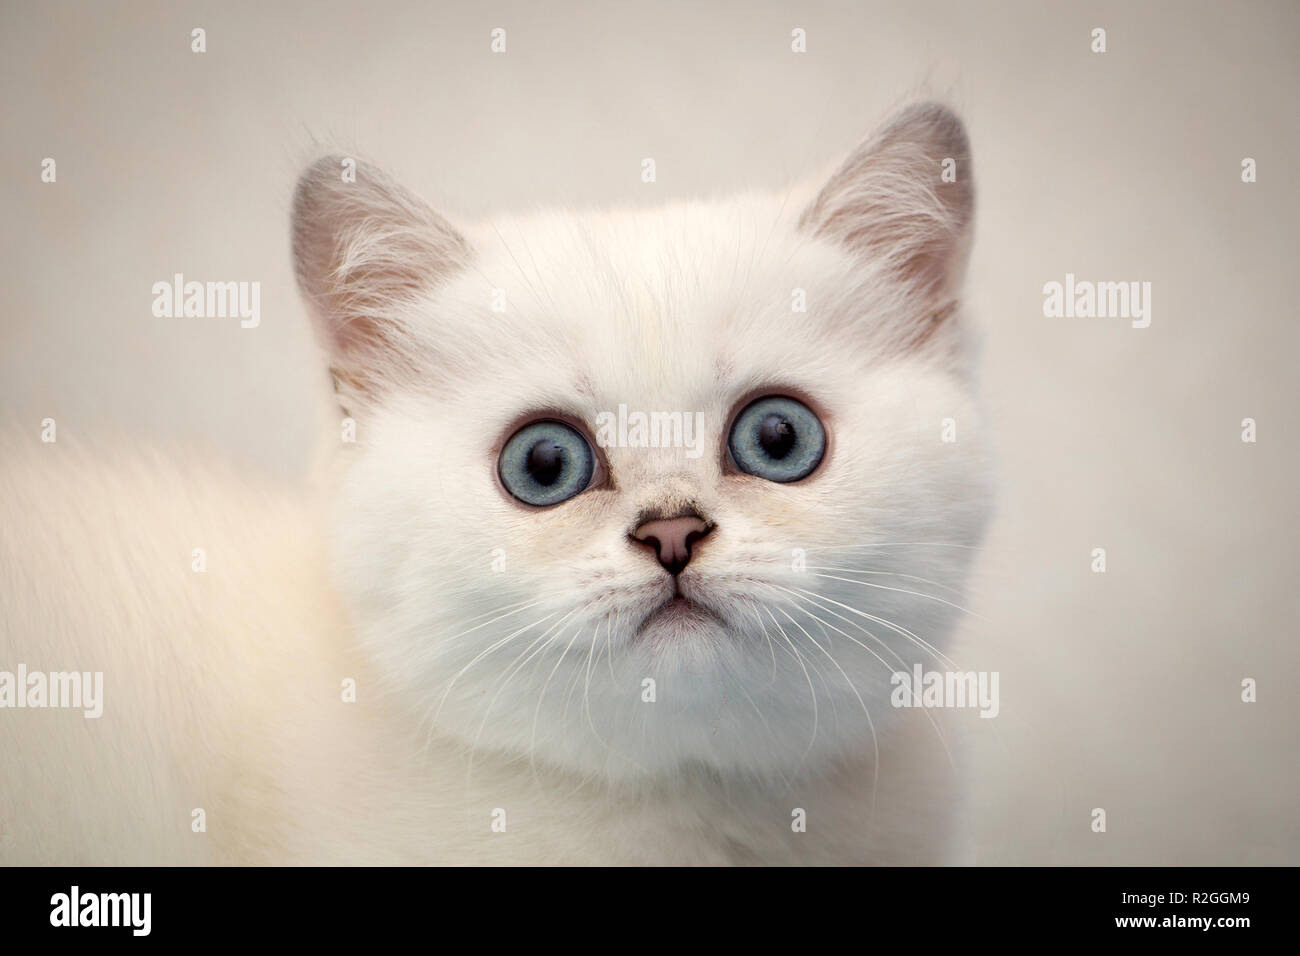 Close-up portrait of a white British kitten black silver shaded pointed with blue eyes looking at the camera Stock Photo